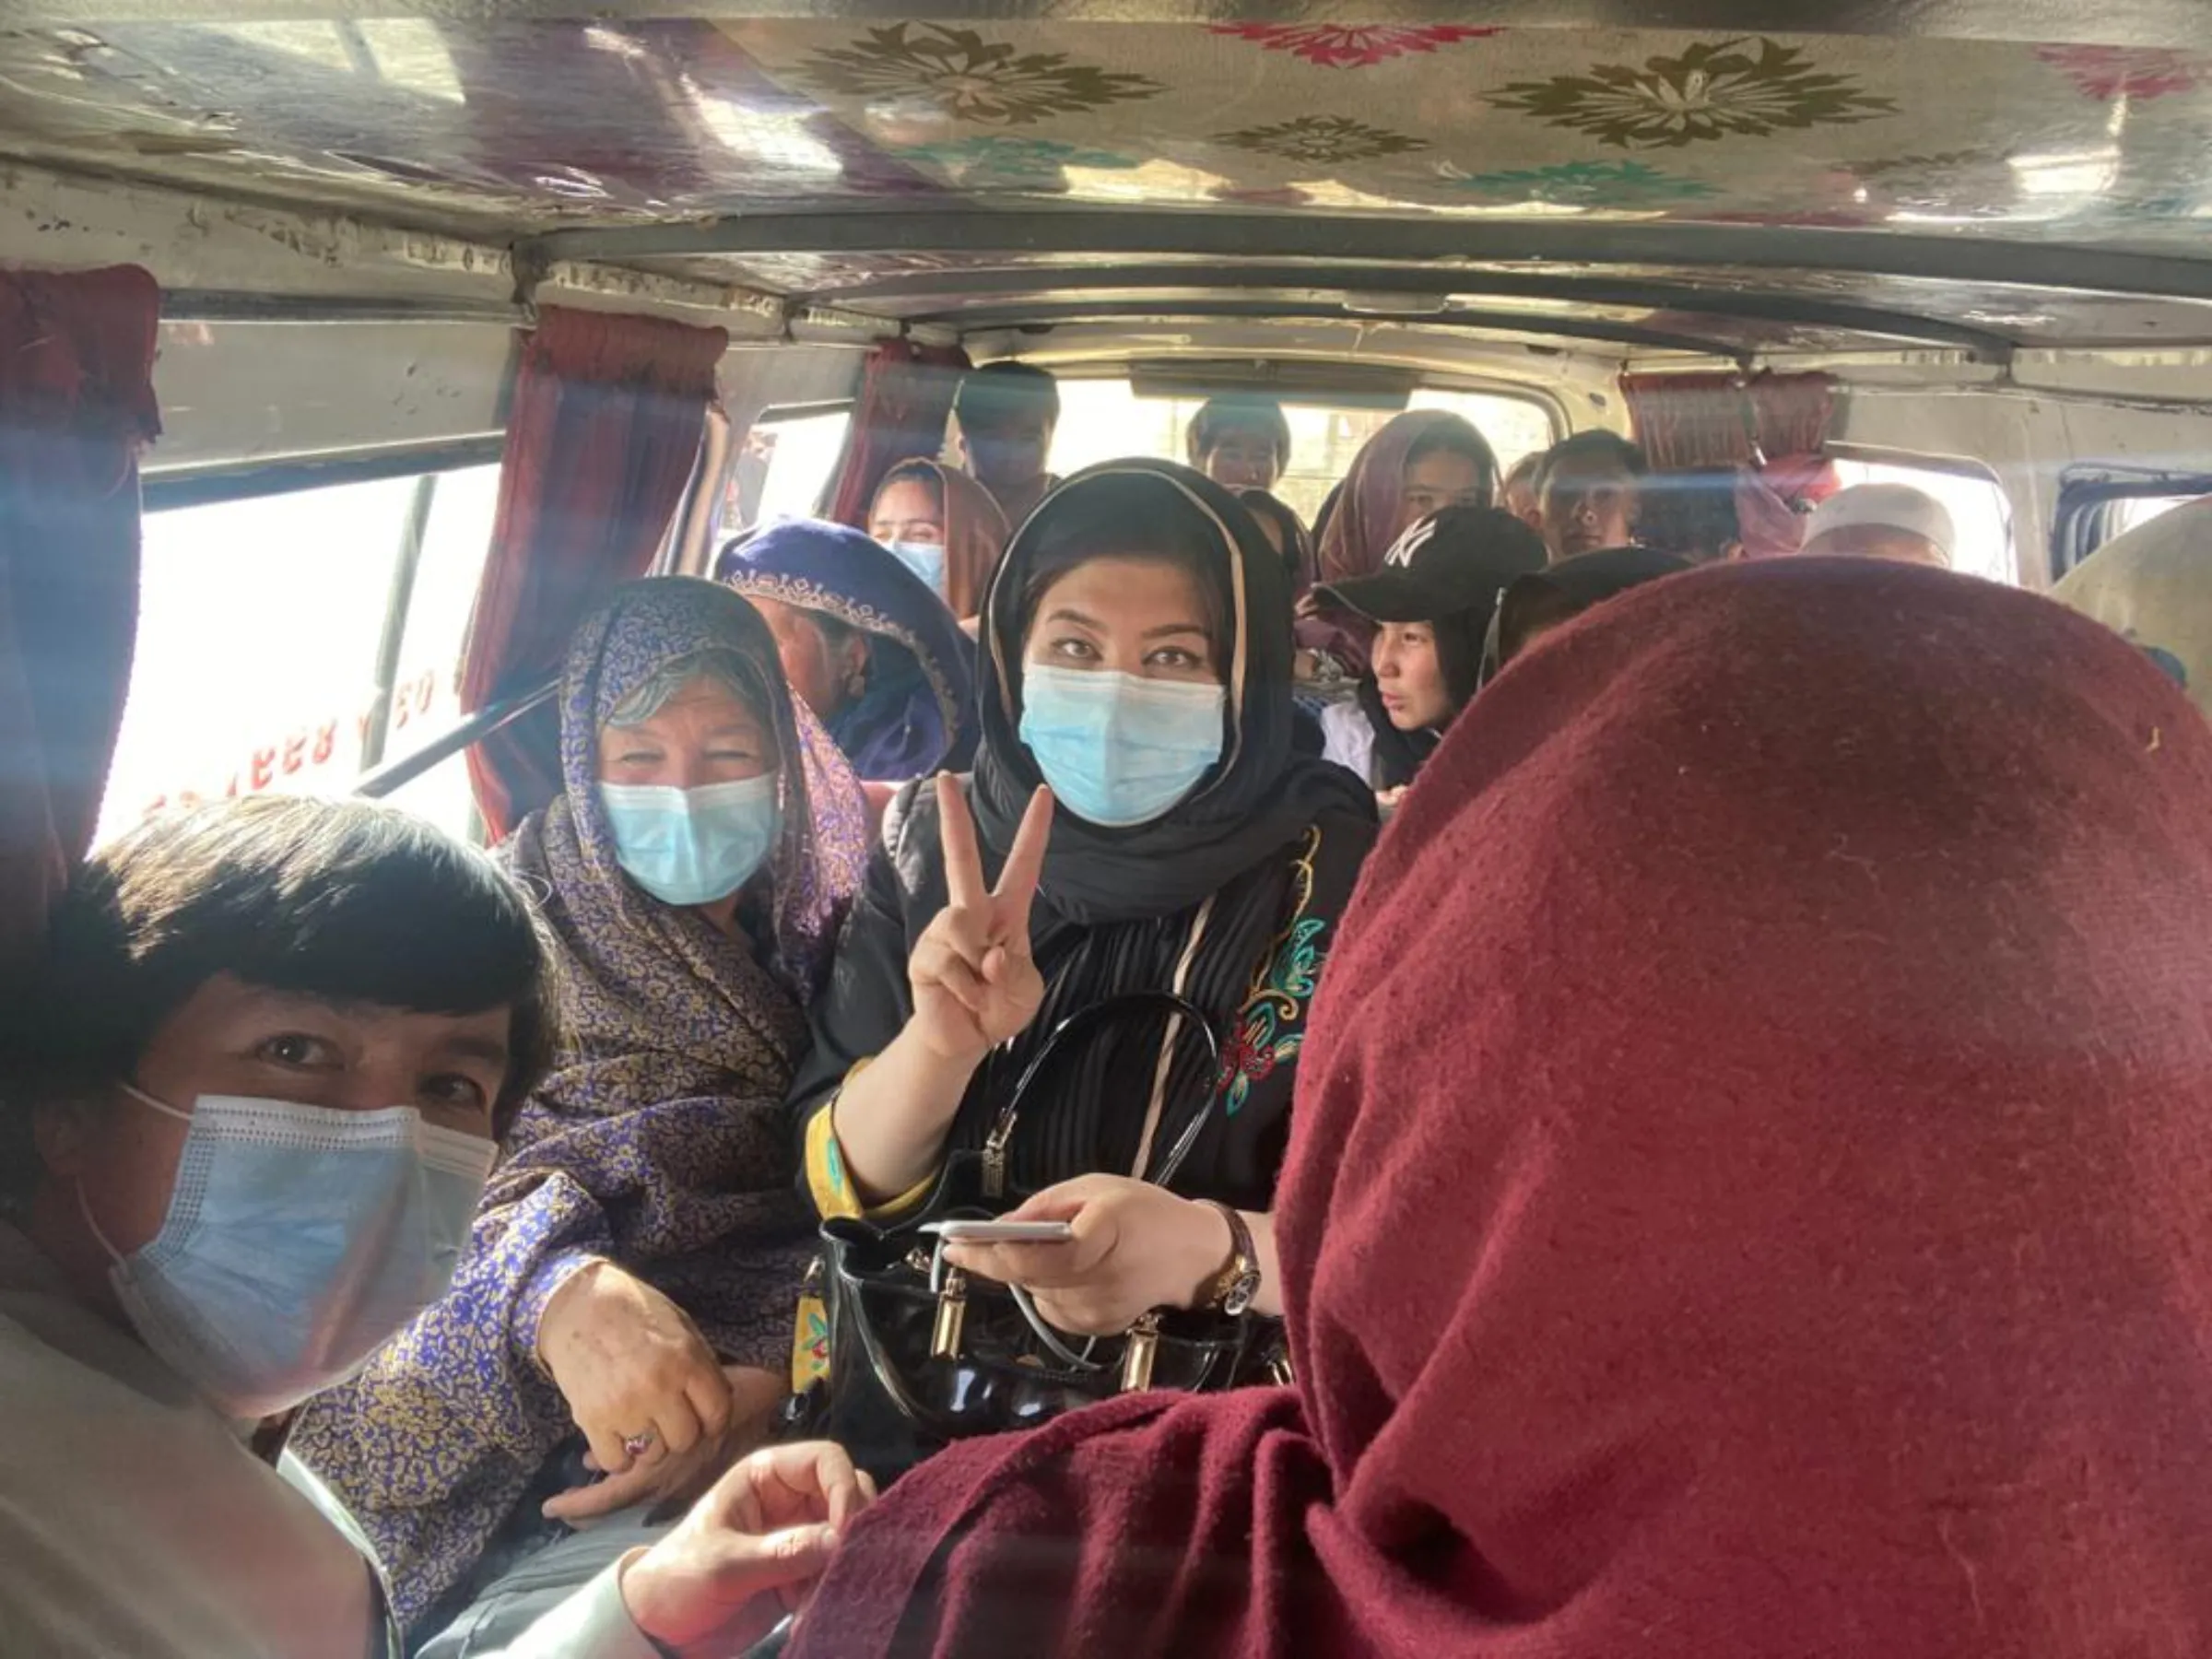 A family wearing COVID-19 masks are seen in a van